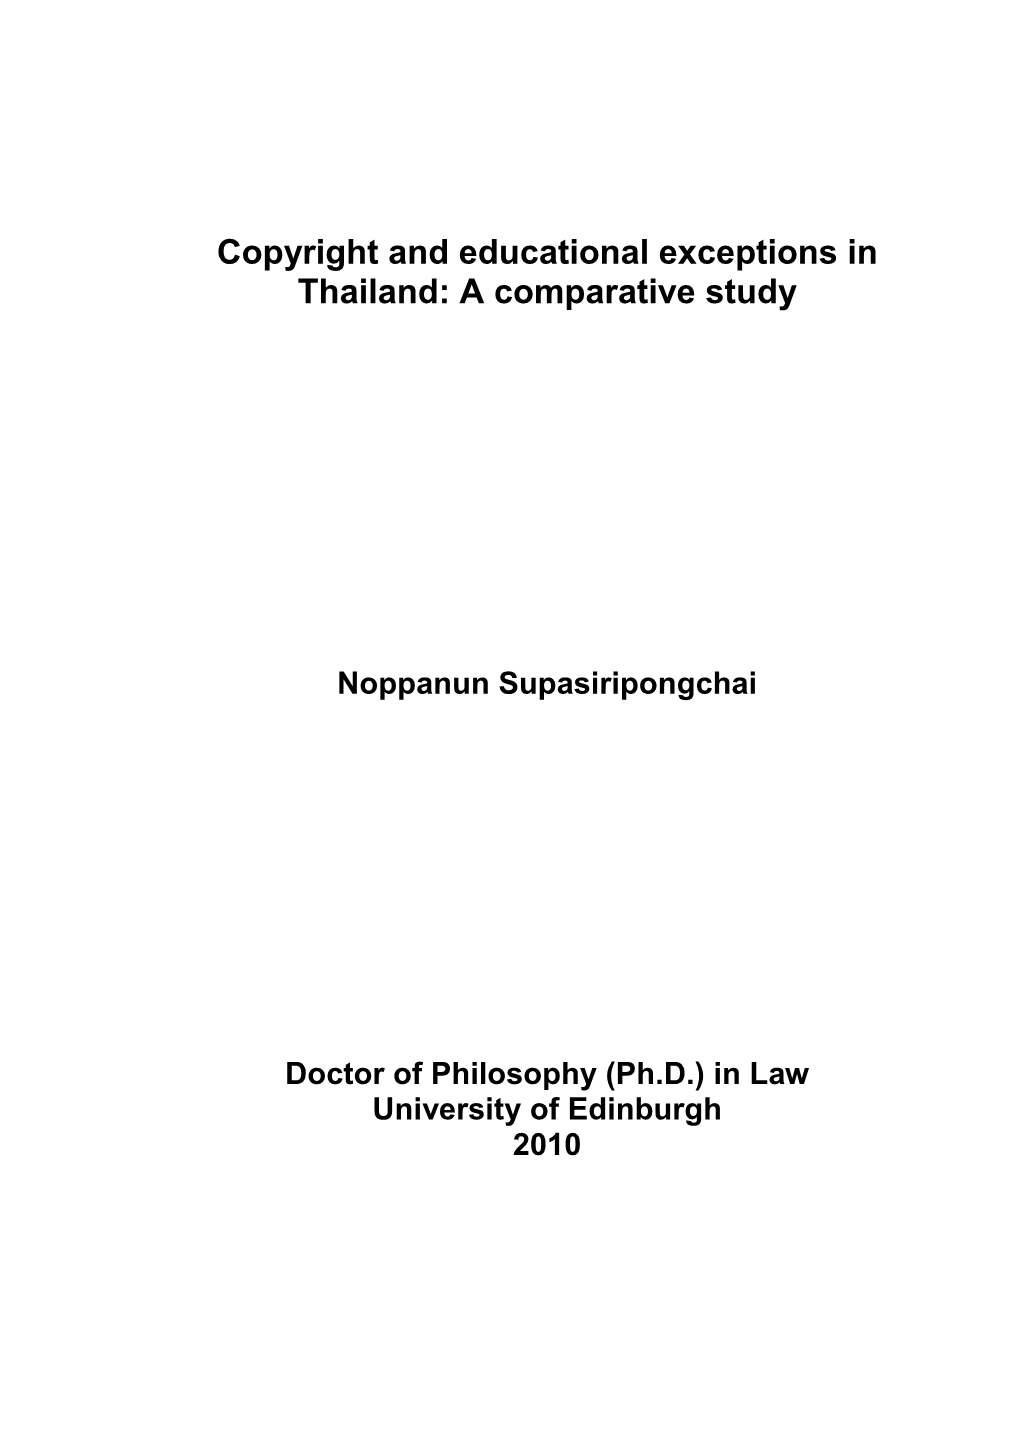 Copyright and Educational Exceptions in Thailand the Phd Thesis